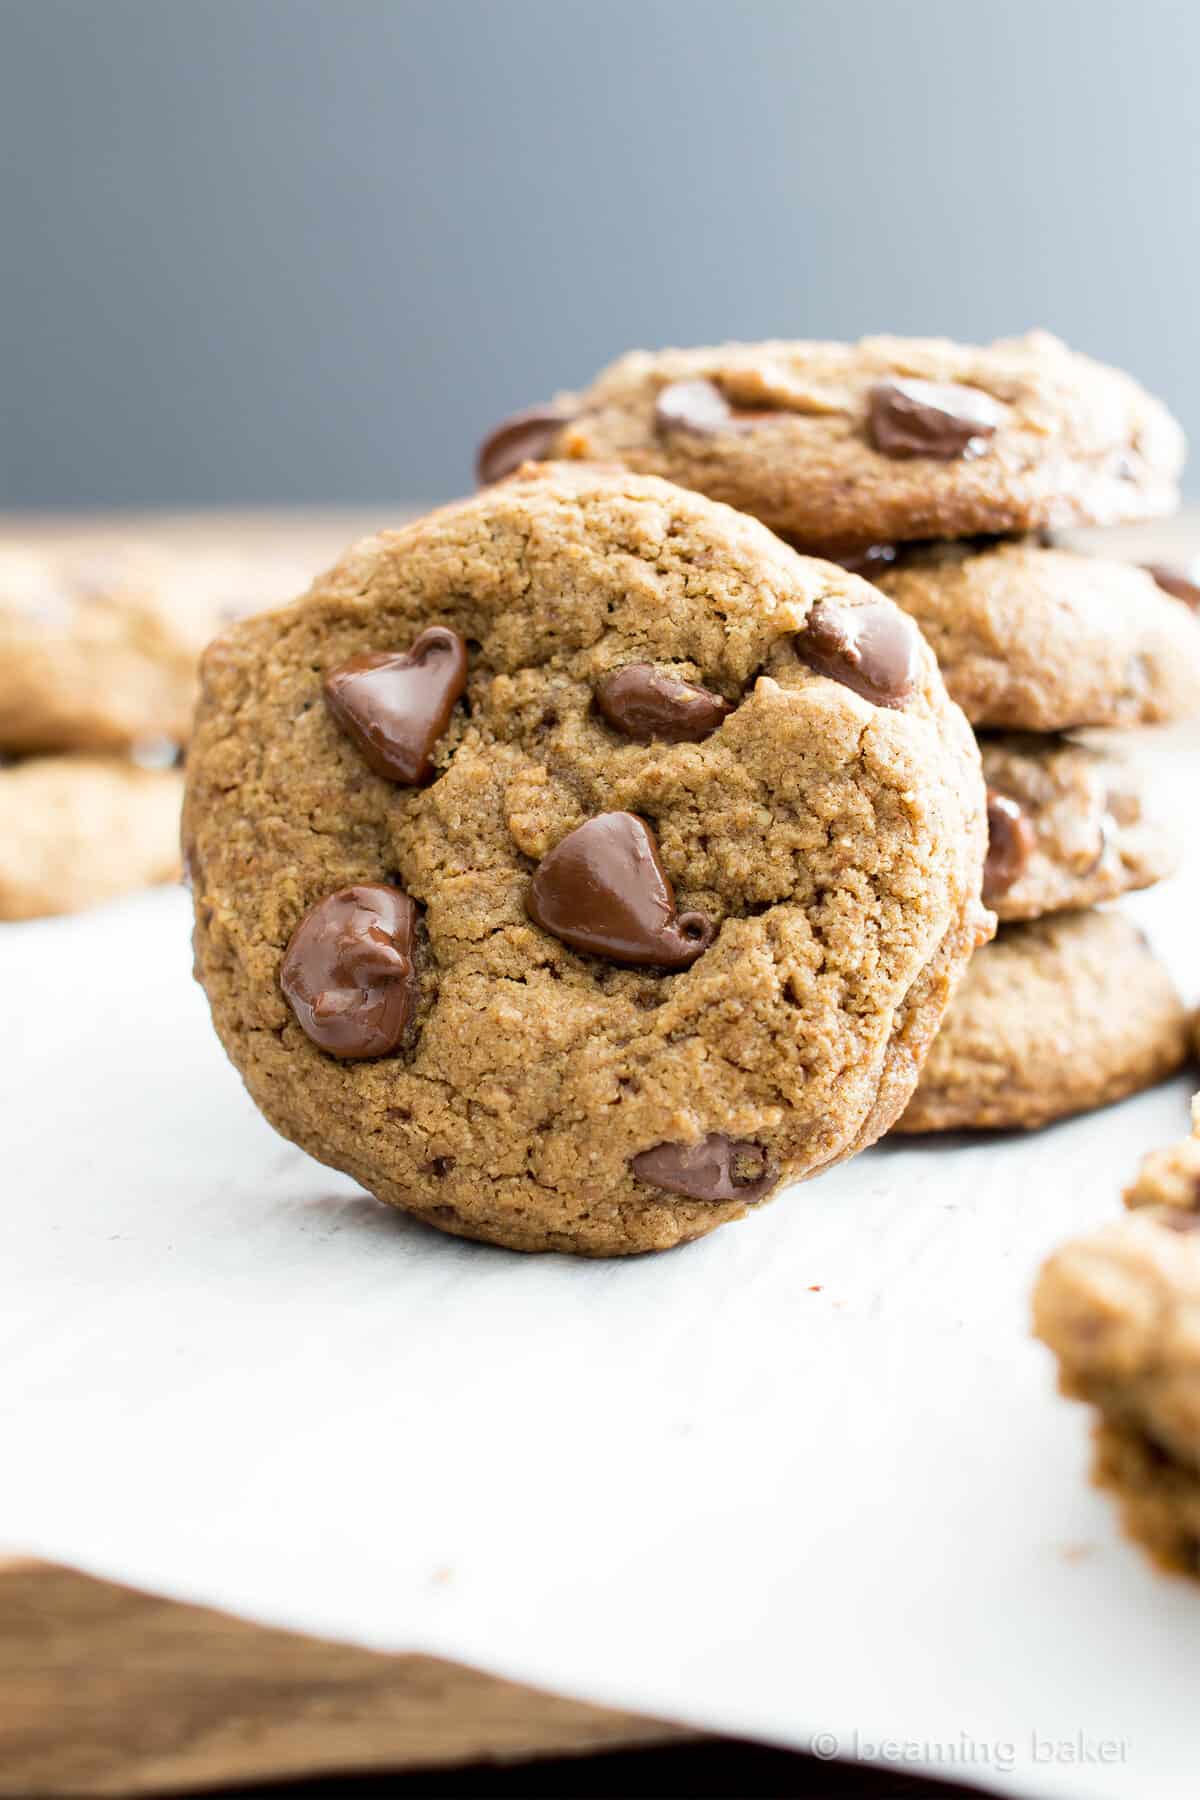 Vegan Chocolate Chip Cookies Recipe (V, GF): Chewy on the inside, crispy on the edges, and packed with rich chocolate. My favorite chocolate chip cookies! #Vegan #GlutenFree #DairyFree #Cookies #Dessert | Recipe on BeamingBaker.com